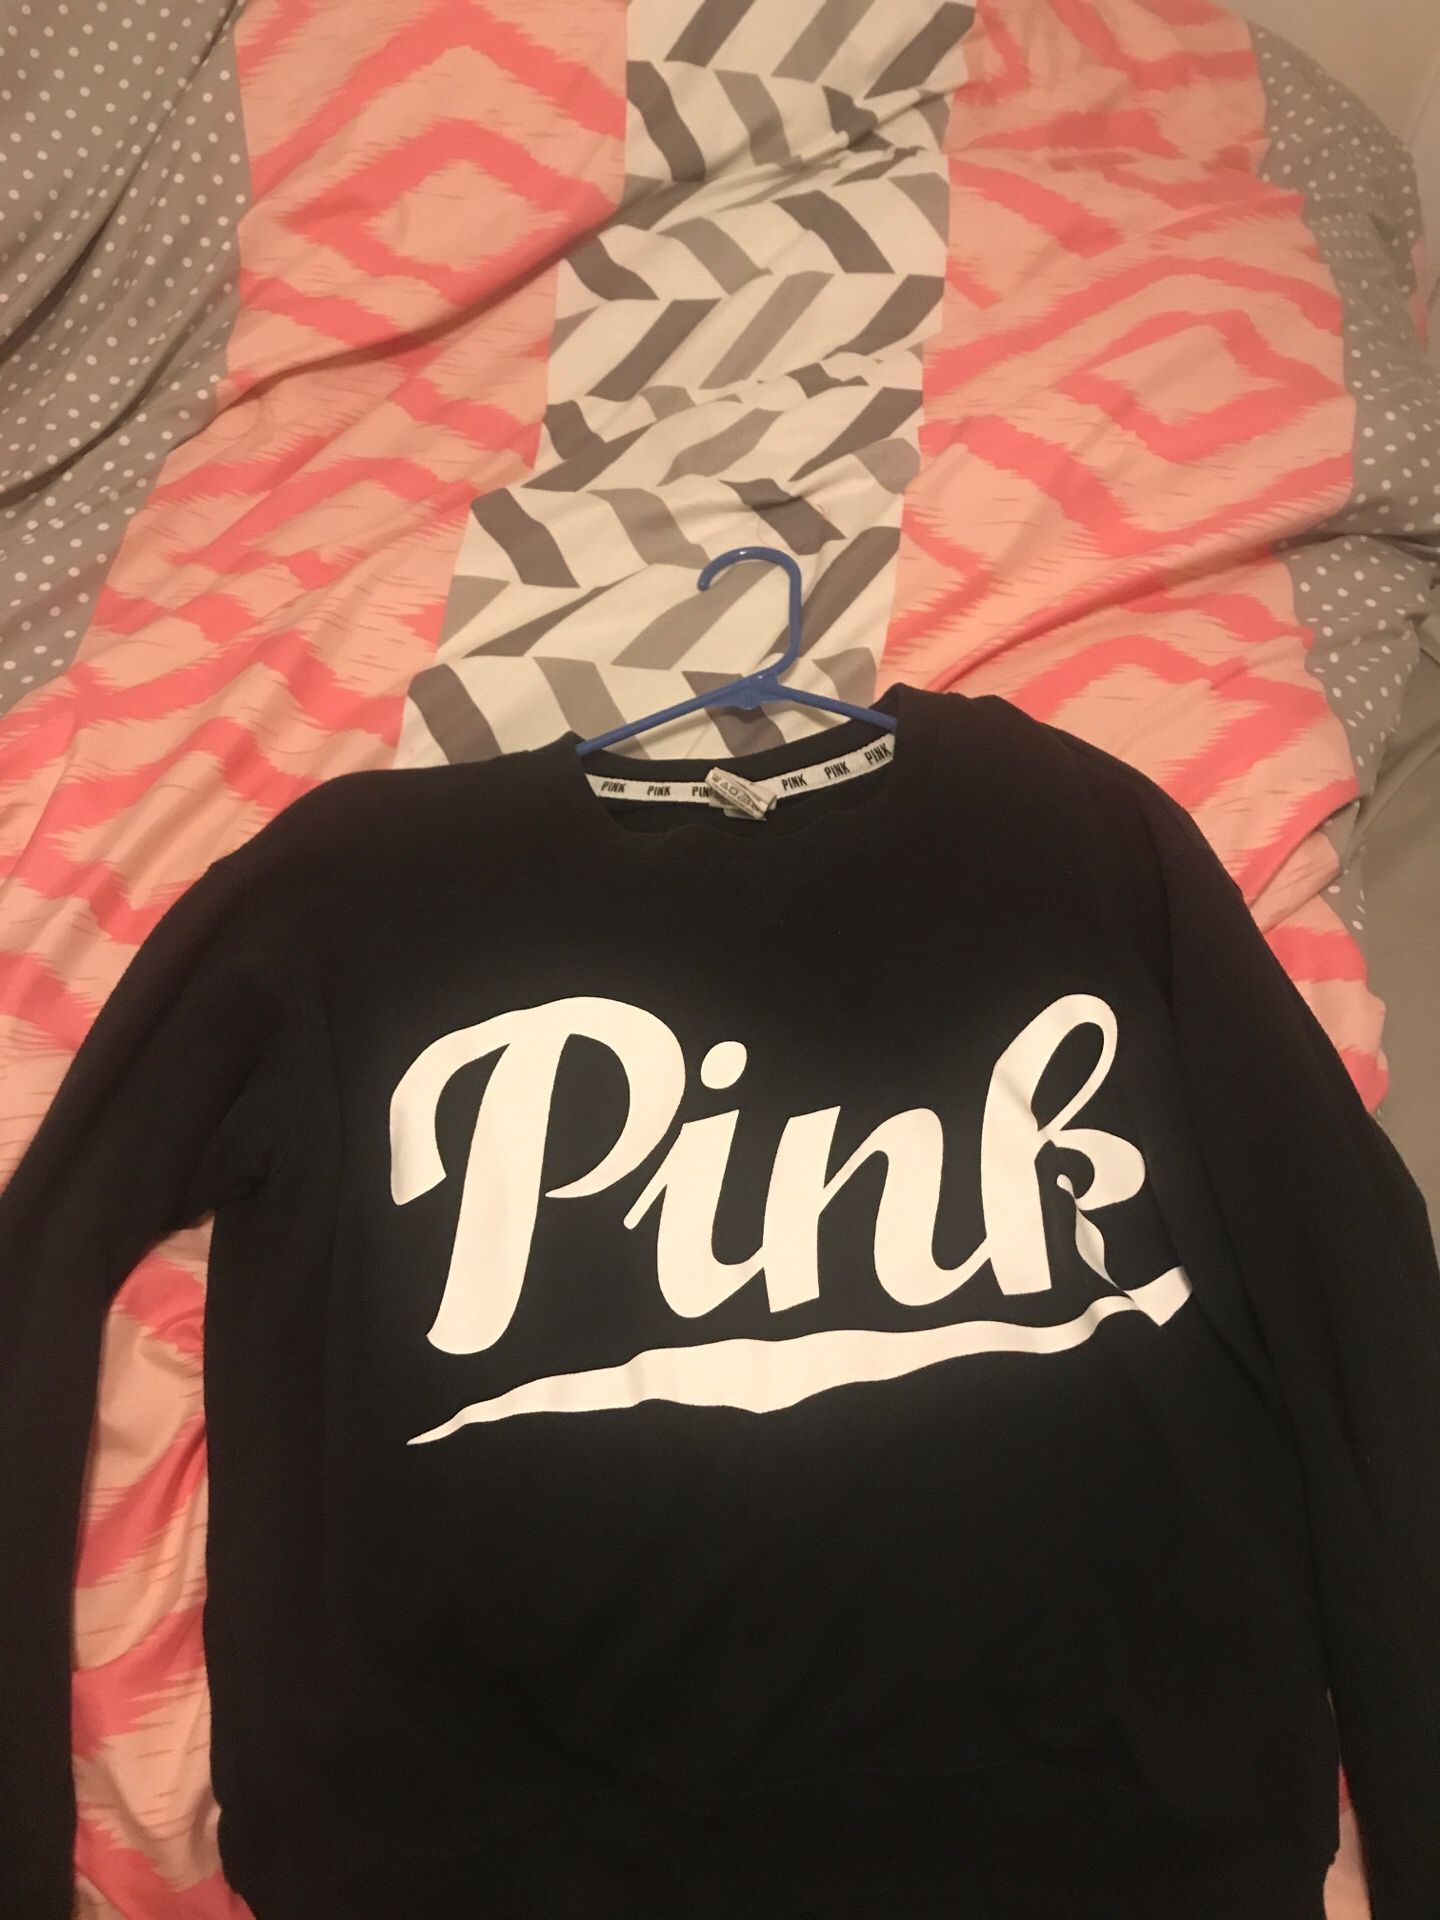 Pull over hoodie from pink